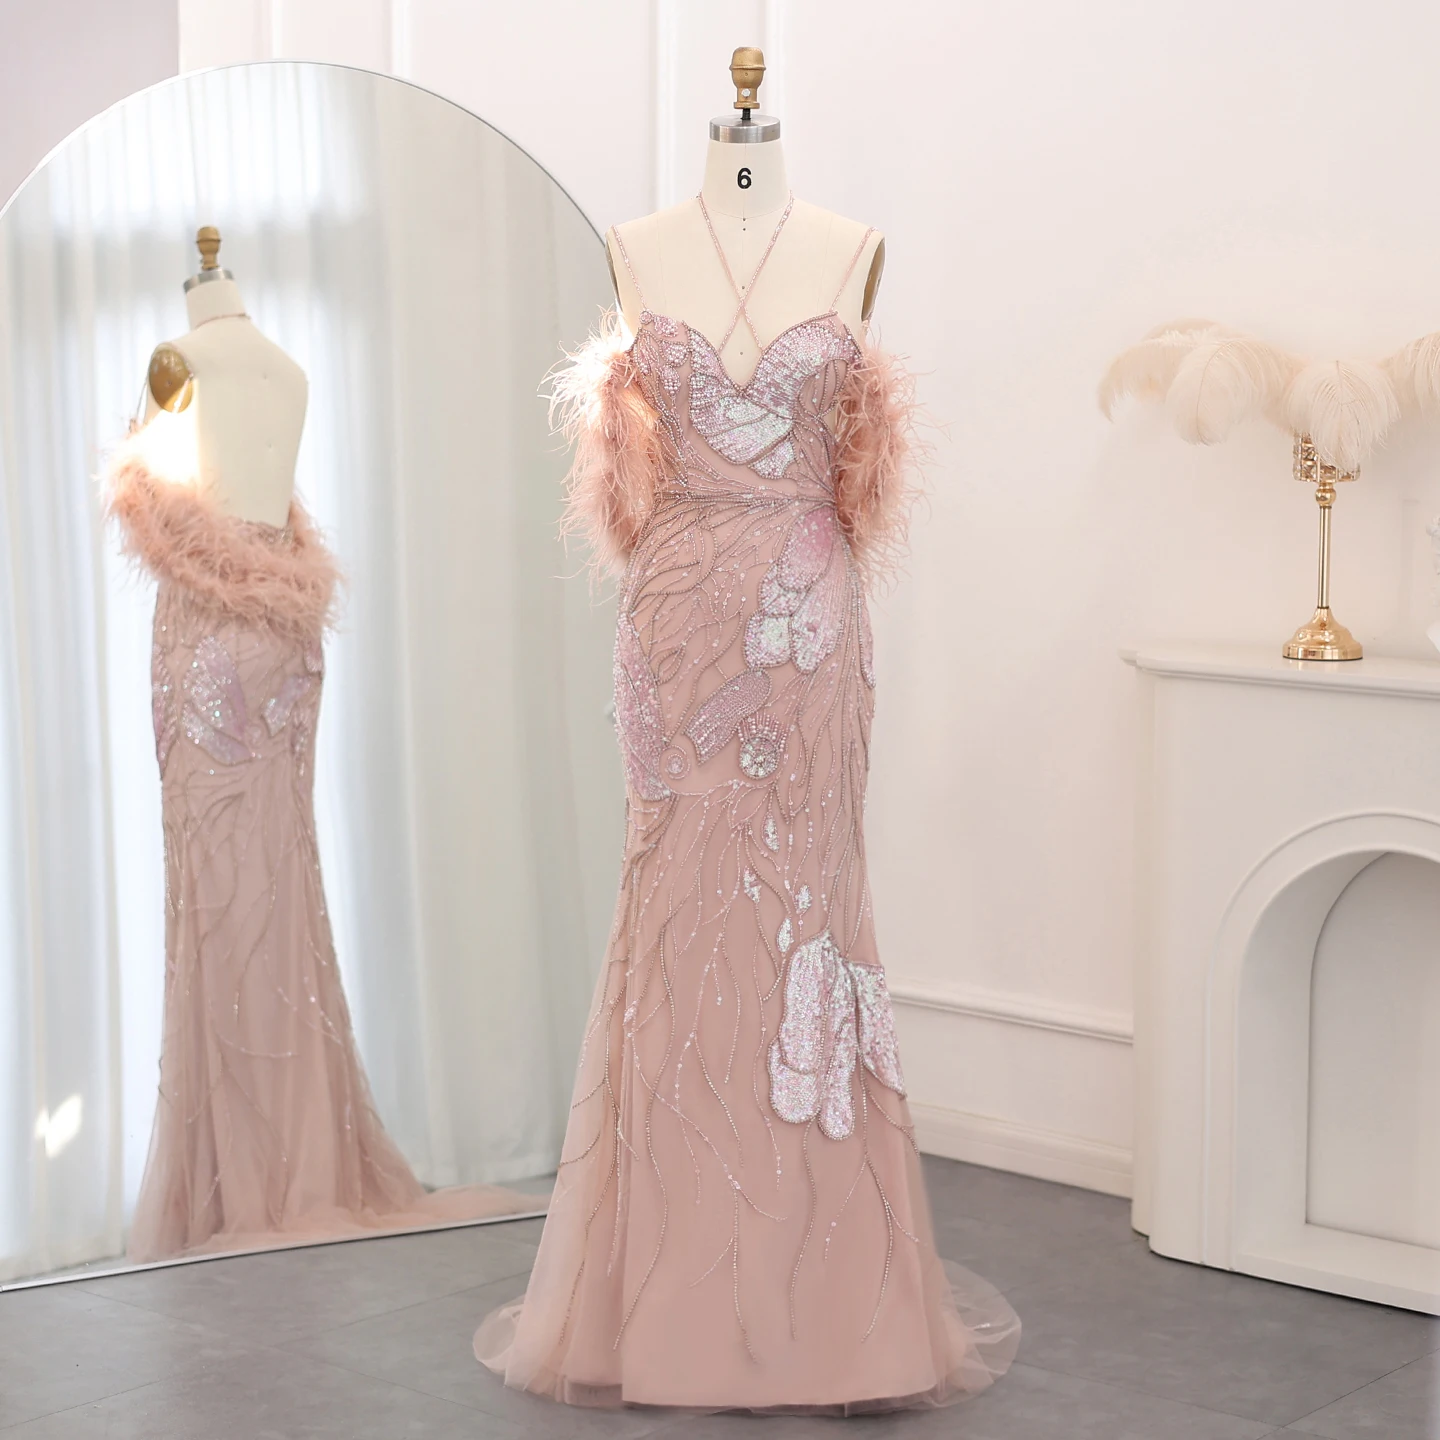 Luxury Mermaid Pink Evening Dresses With Feathers Scarf Spaghetti ...